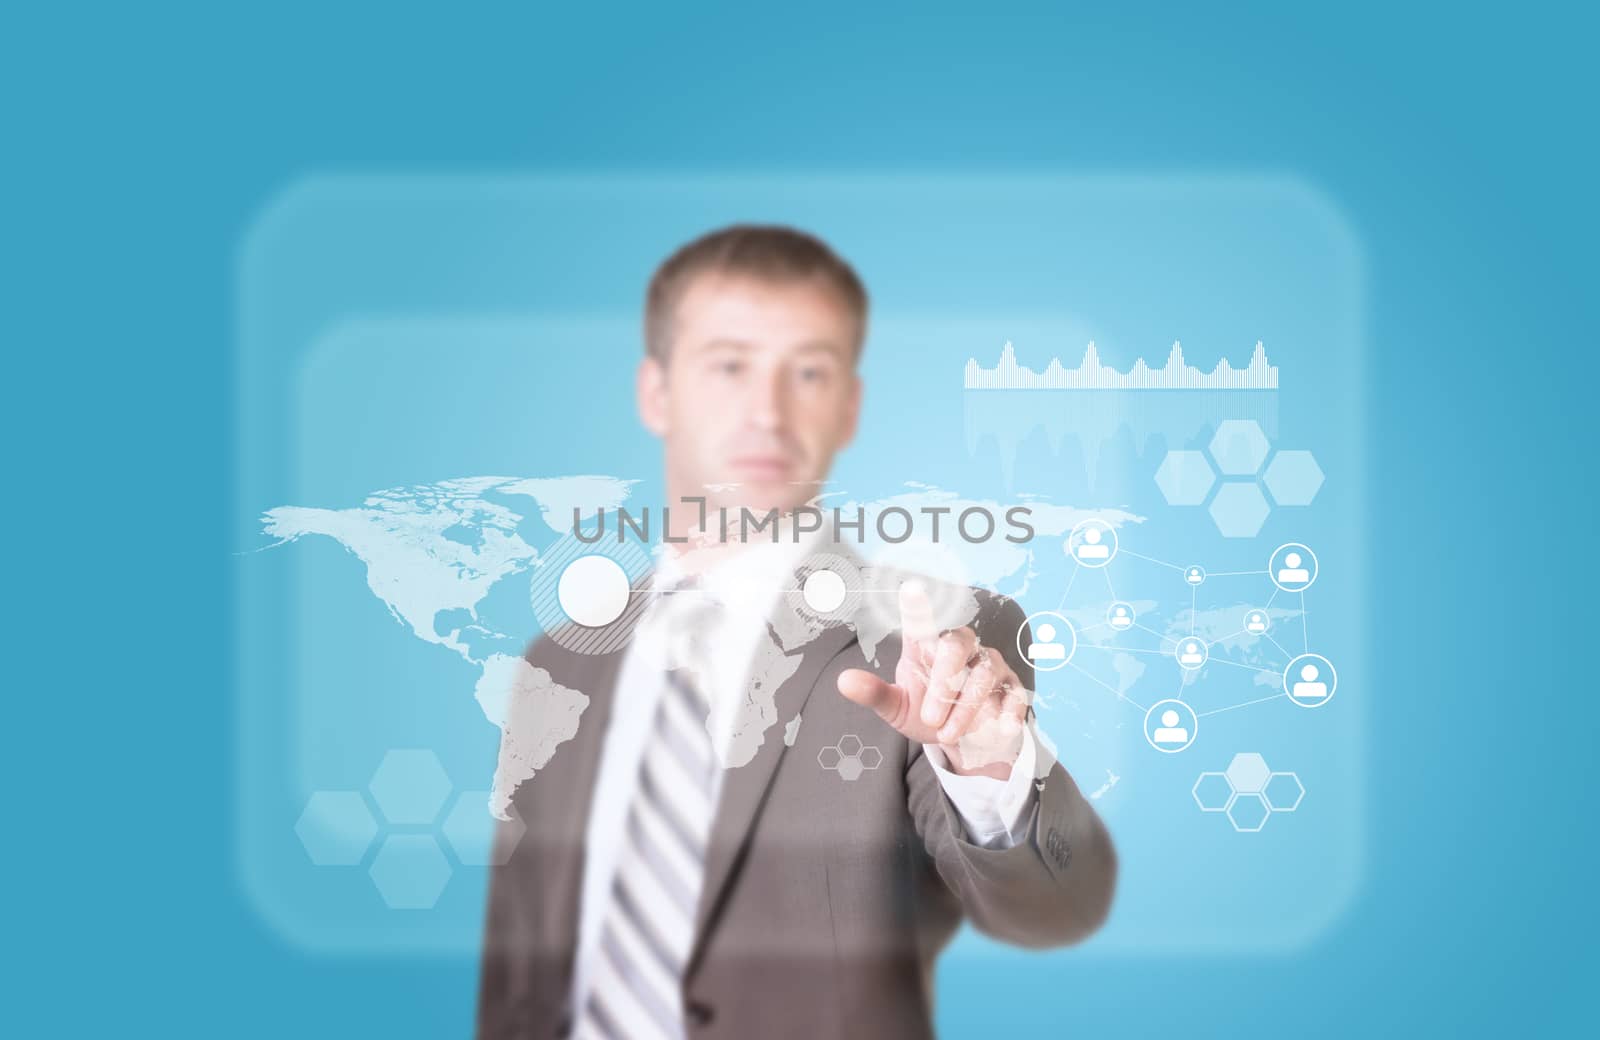 Businessman in suit finger presses virtual button by cherezoff